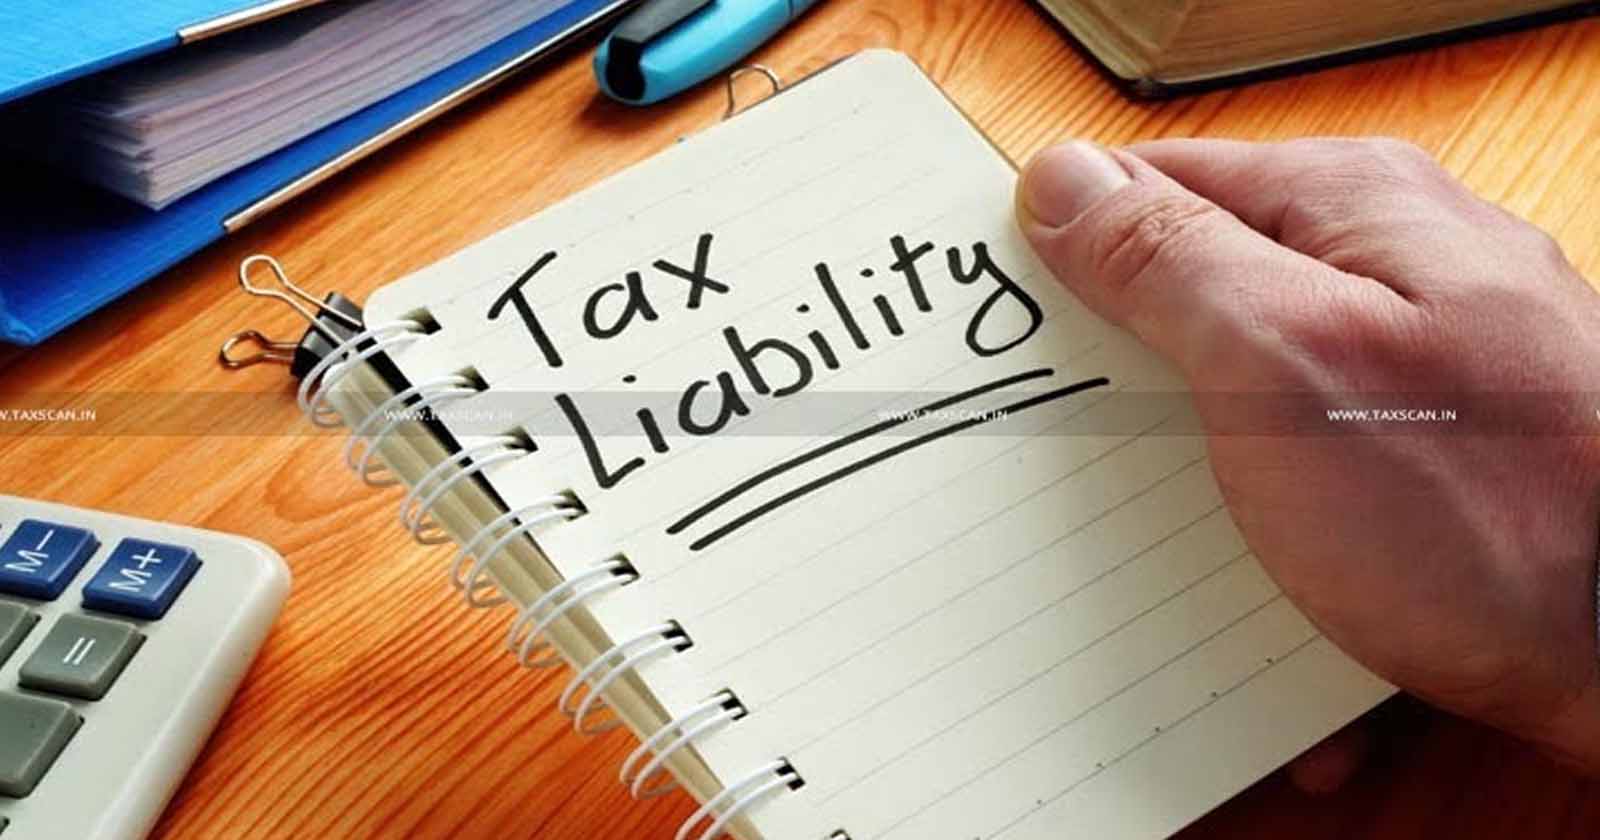 ITAT - Directs - Delete - Addition - AO - ground - Wrongful - Assessment - Tax - Liability - TAXSCAN